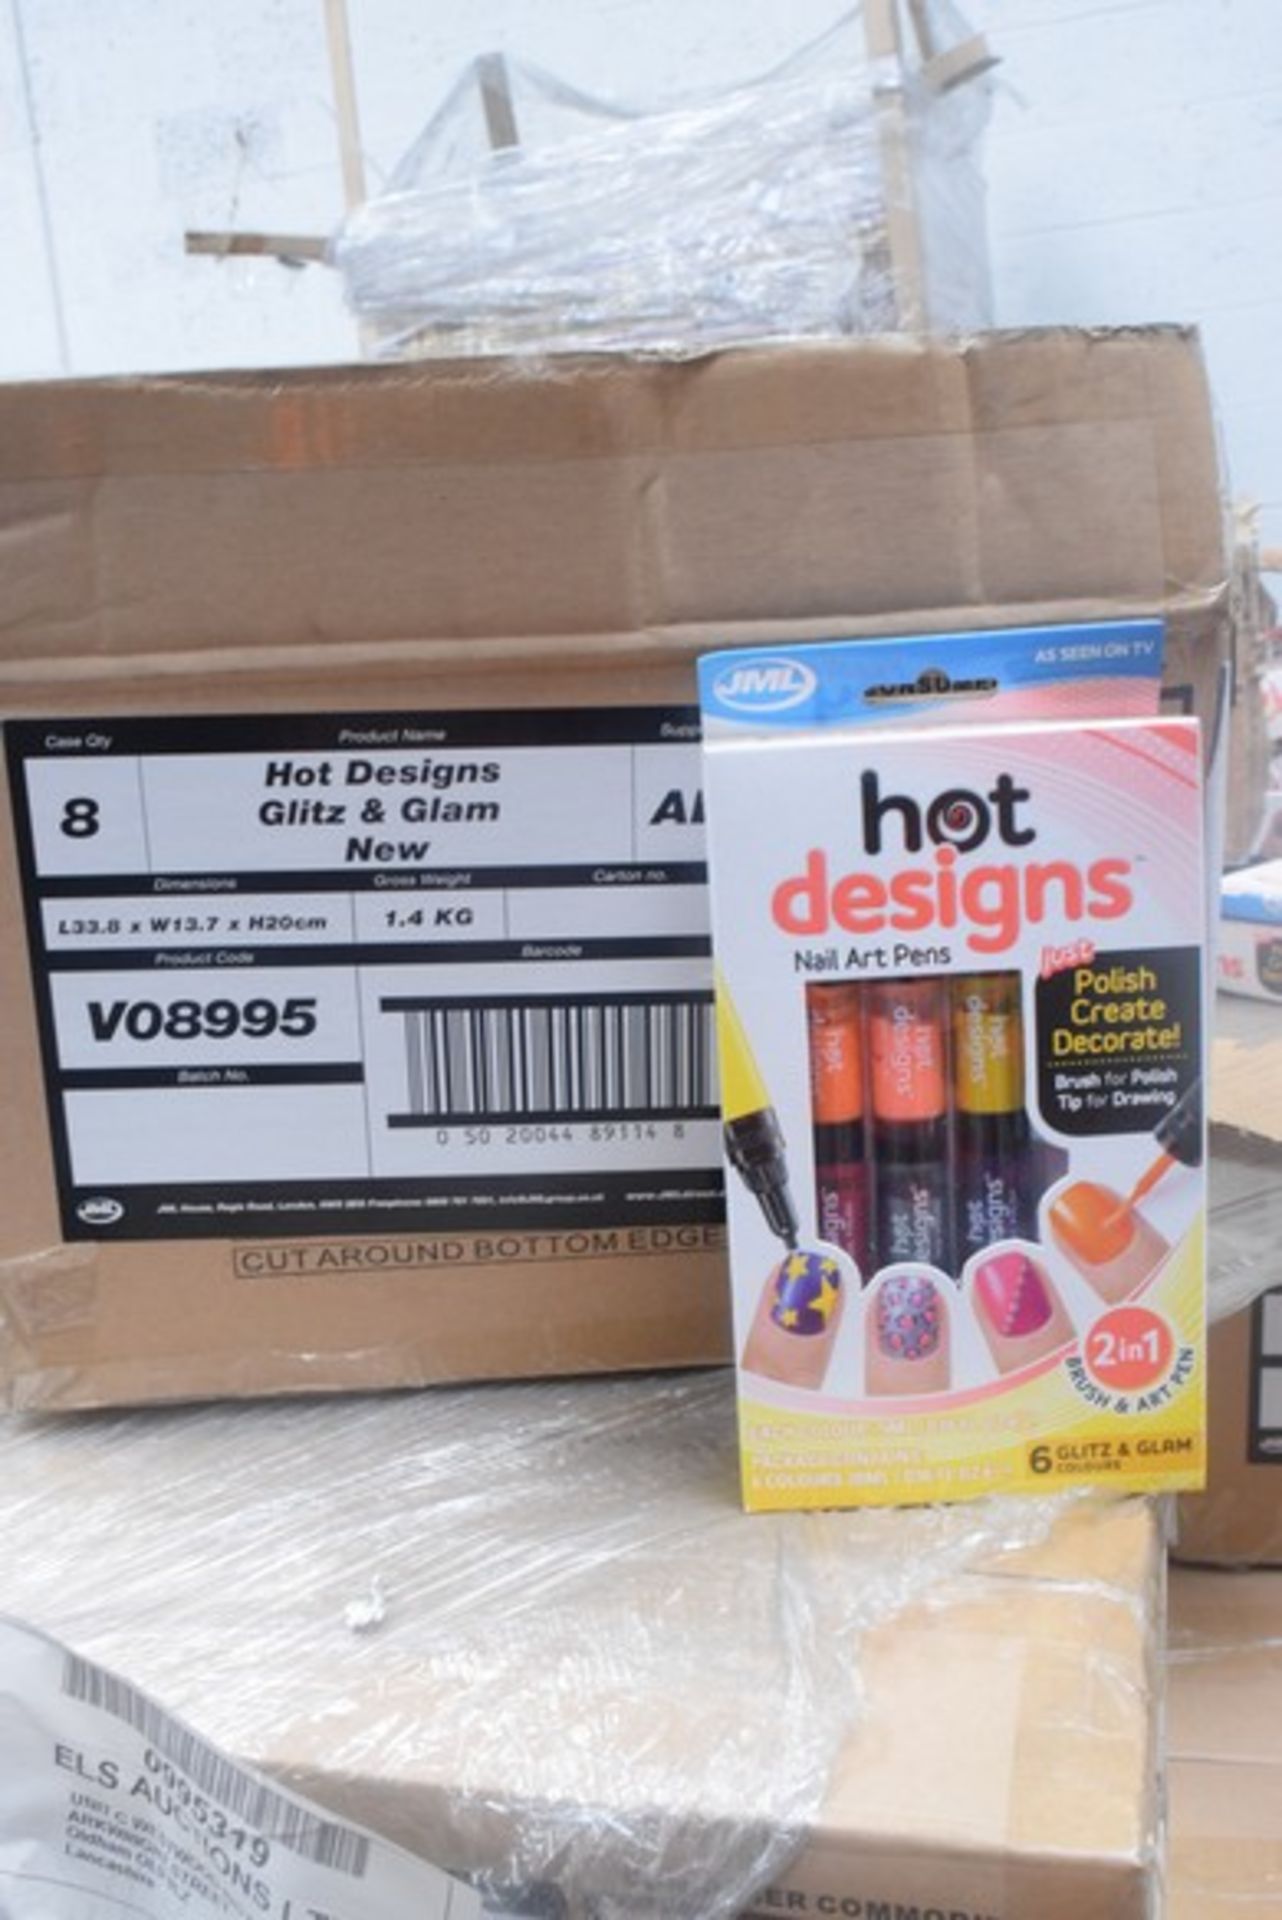 1 x BOX OF 8 PACKS OF HOT DESIGNS GLITZ AND GLAM NAIL ART PENS RRP £10 PER PACK *PLEASE NOTE THAT